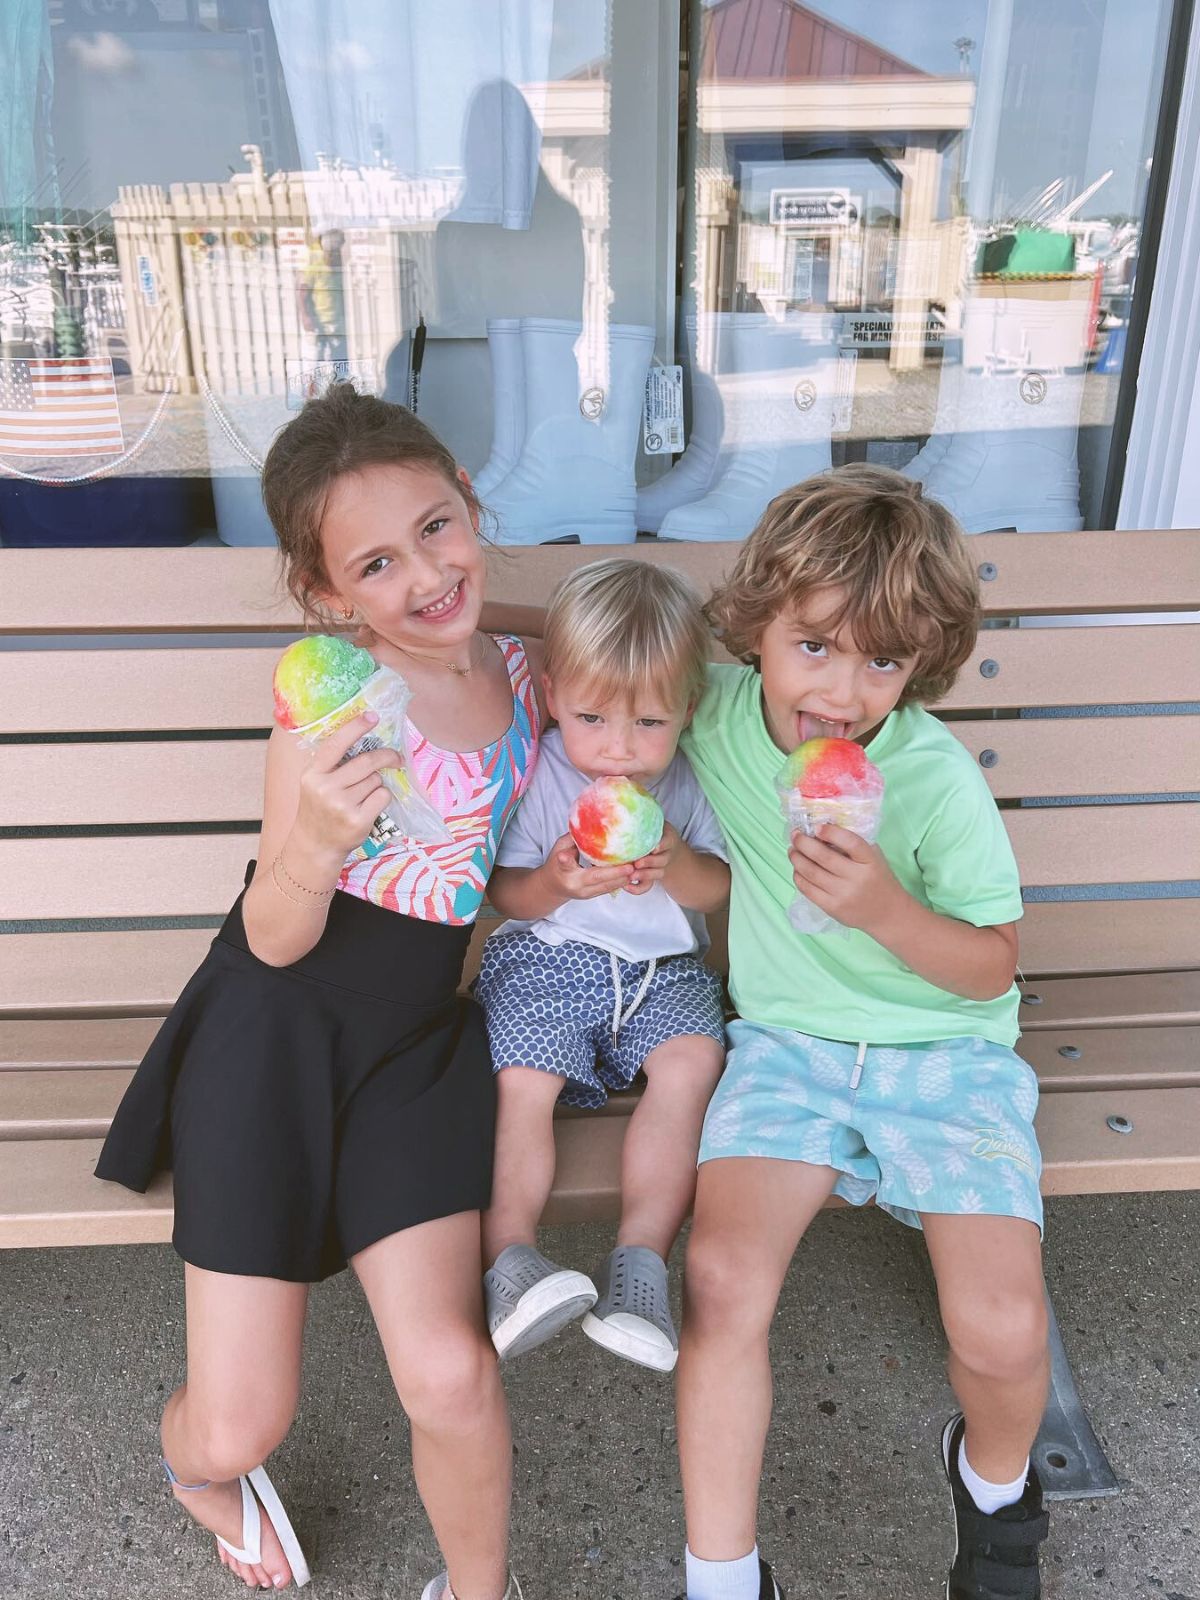 a group of children sitting on a bench eating ice cream